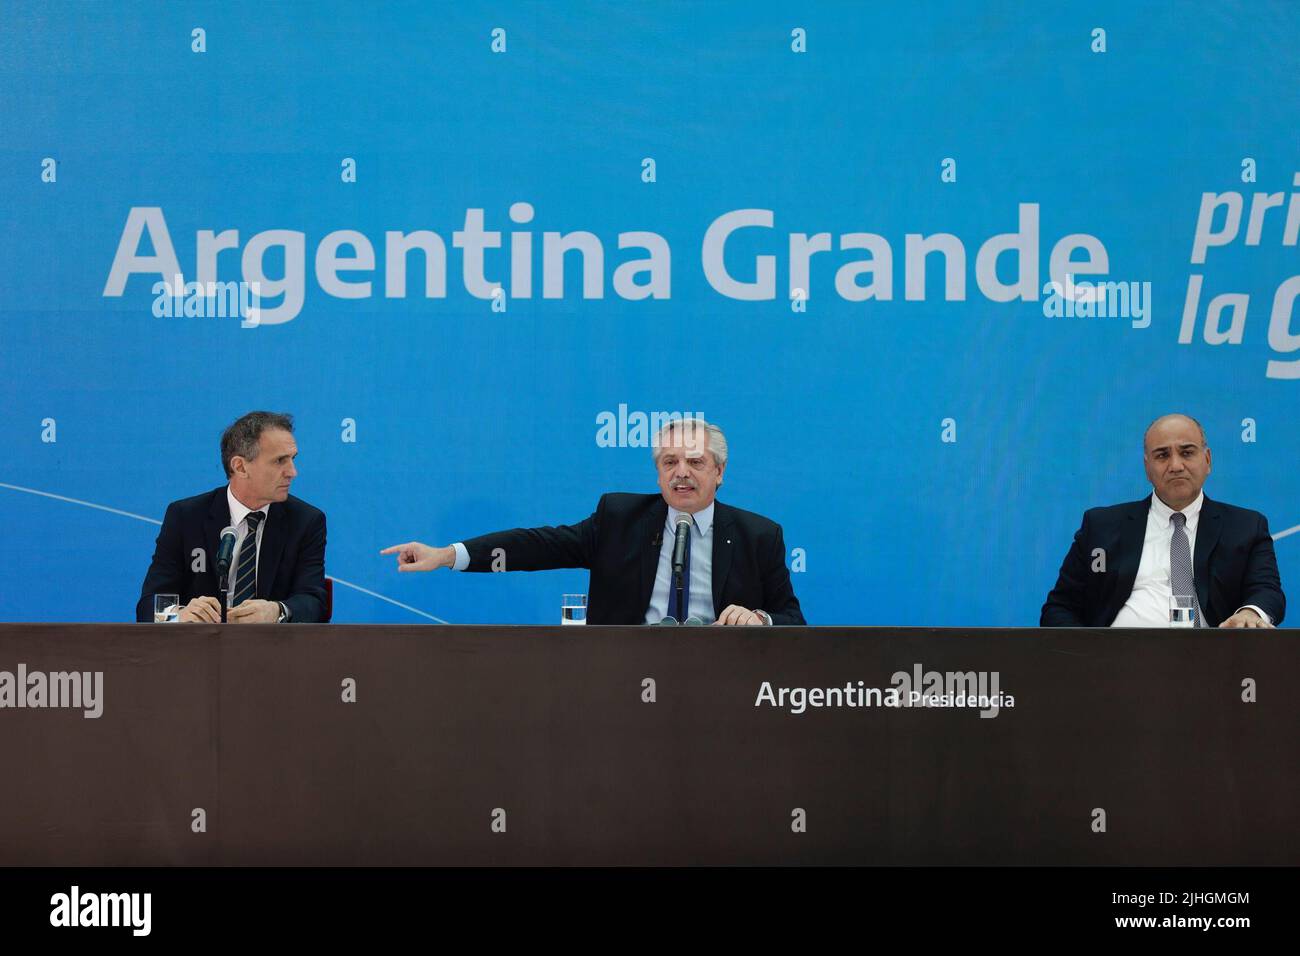 Buenos Aires, 18th July 2022. President Alberto Fernández led the presentation of Argentina Grande, Infrastructure Plan for the Development of the Nation, together with the Minister of Public Works, Gabriel Katopodis and the Chief of the Cabinet of Ministers Juan Manzur (Credit: Esteban Osorio/Alamy Live News) Stock Photo